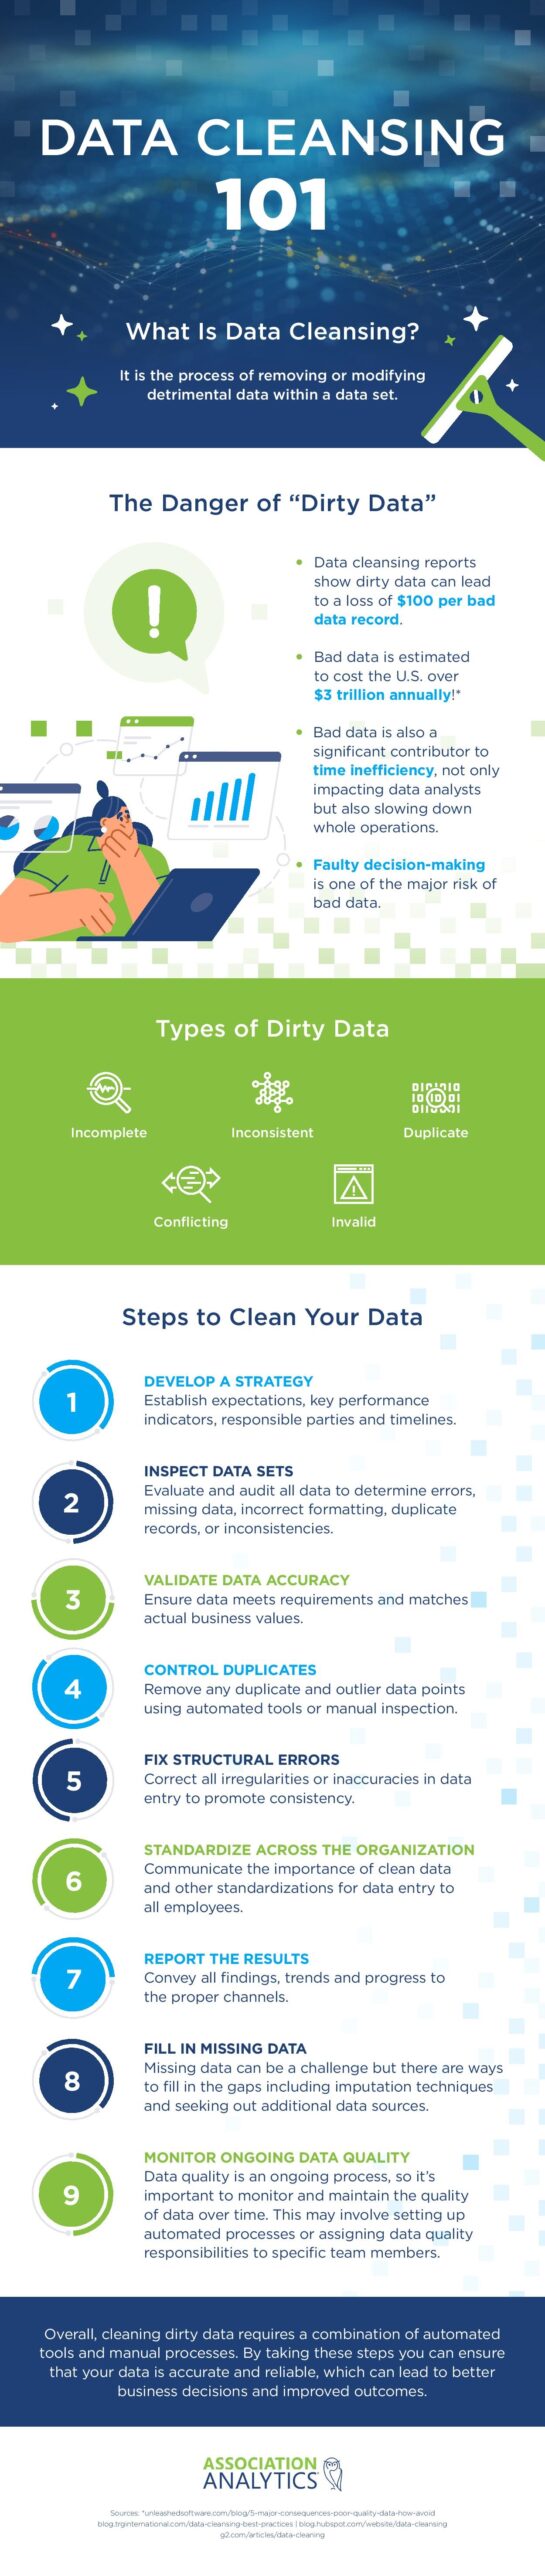 Data Cleansing 101 1